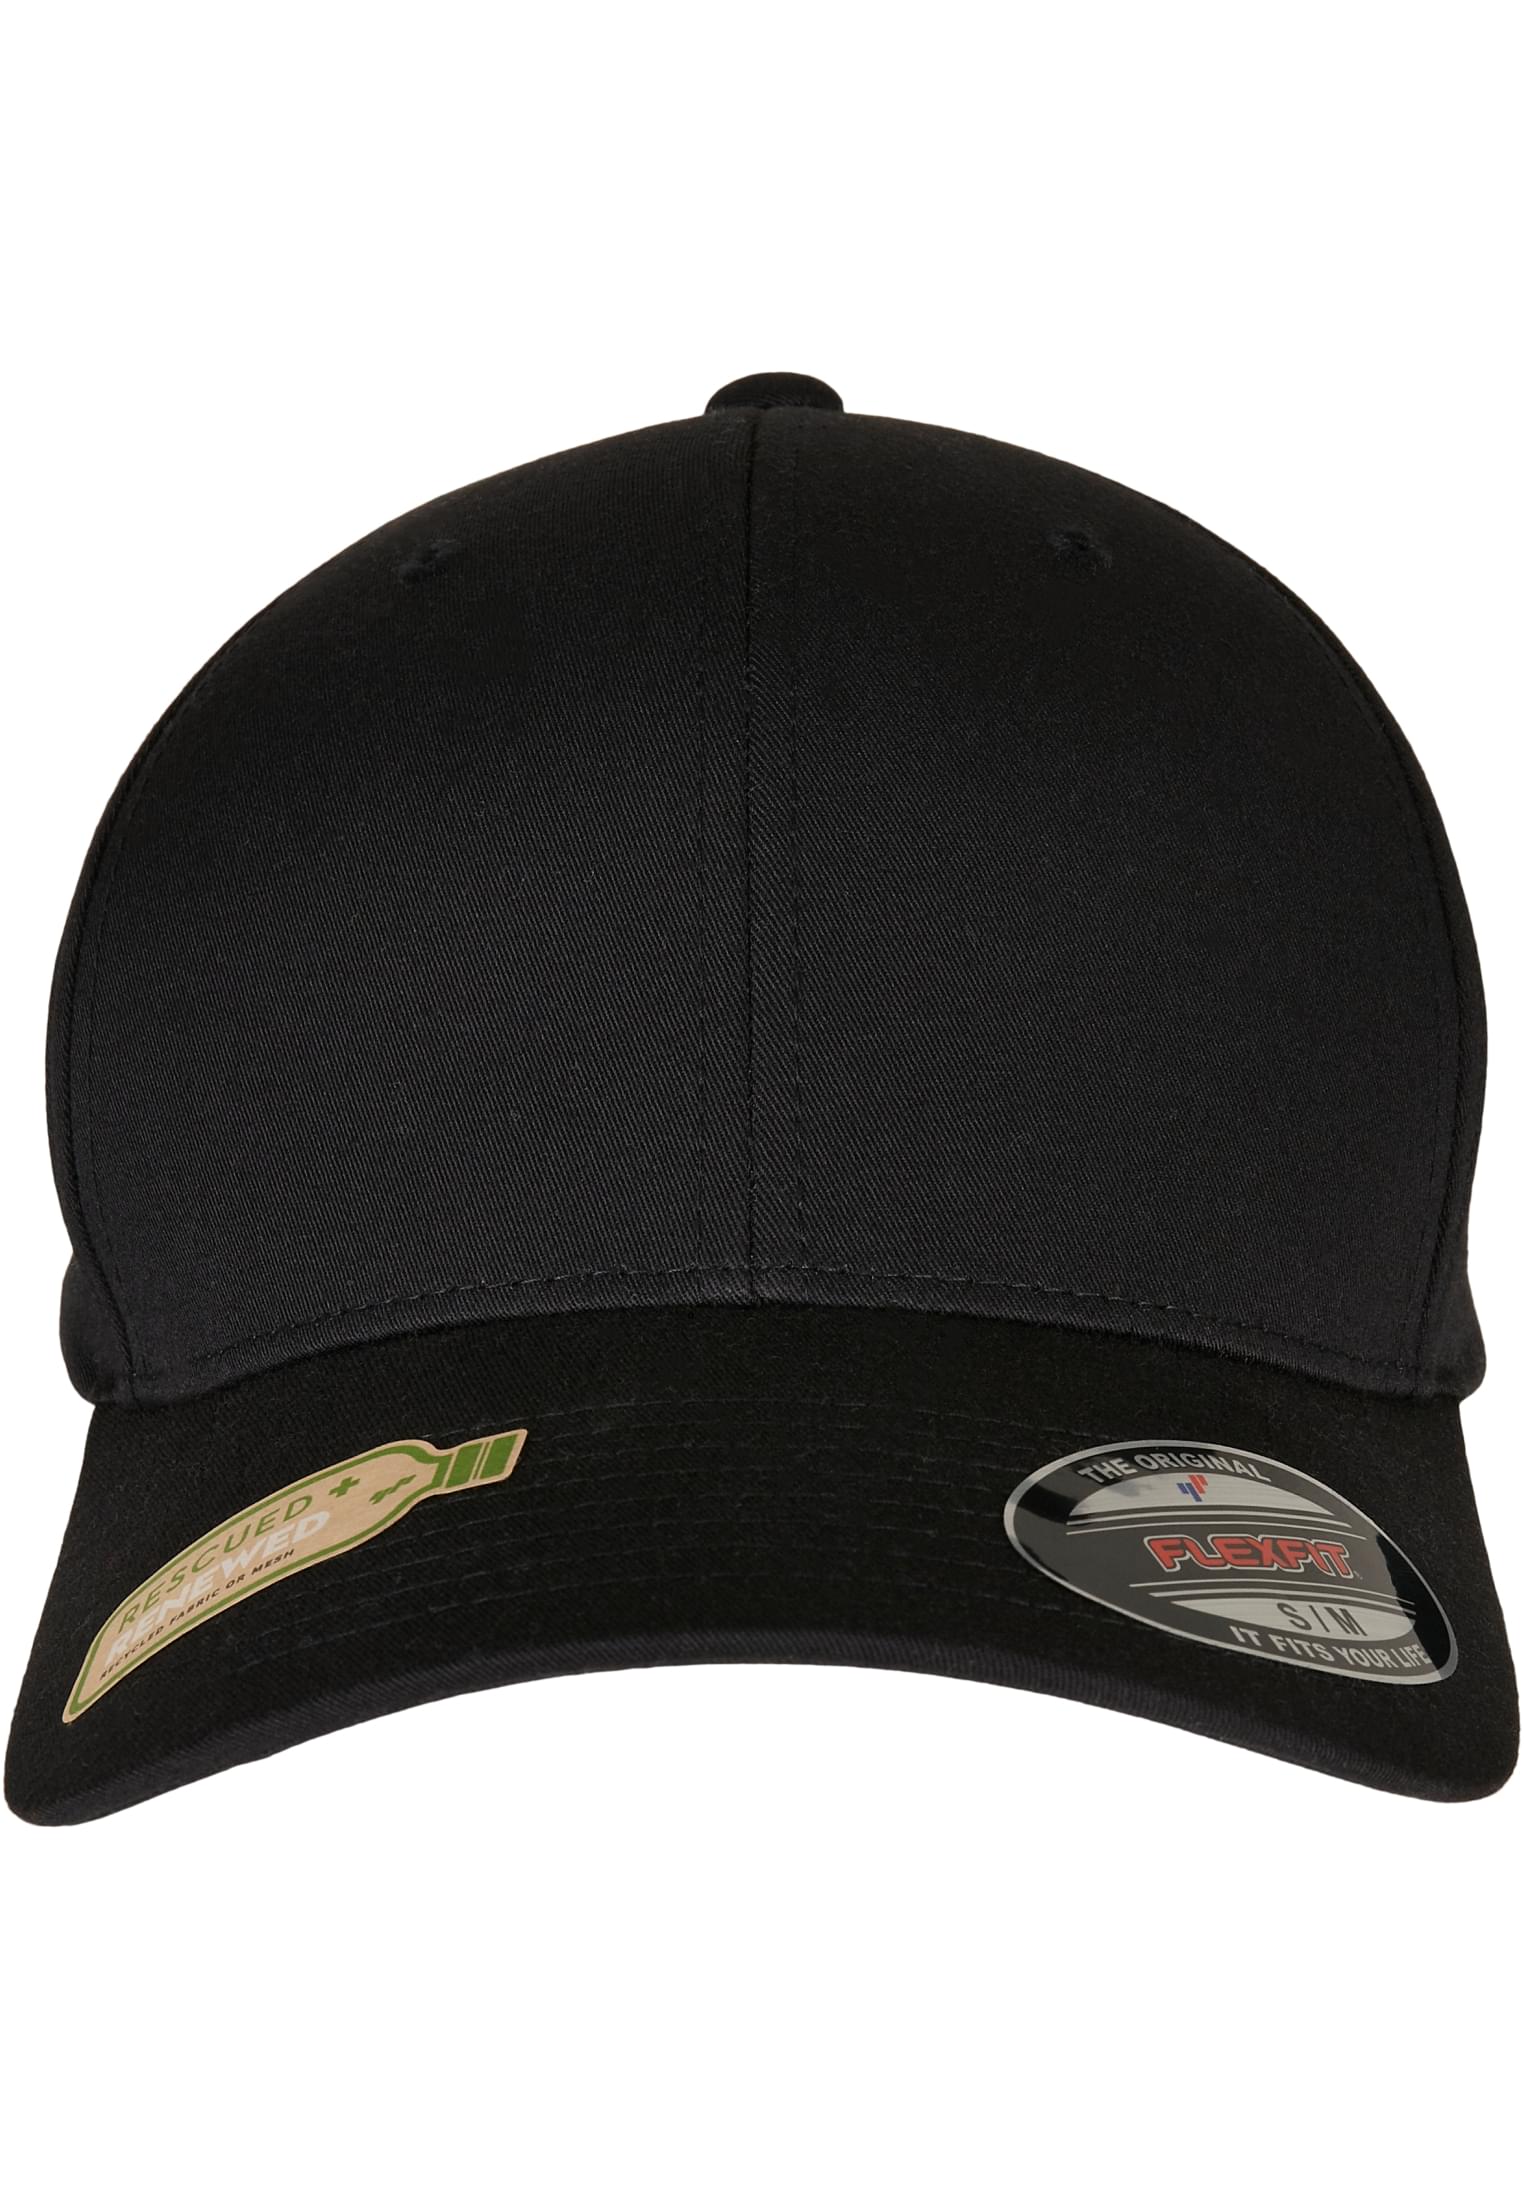 Cap-6277RP Flexfit Recycled Polyester